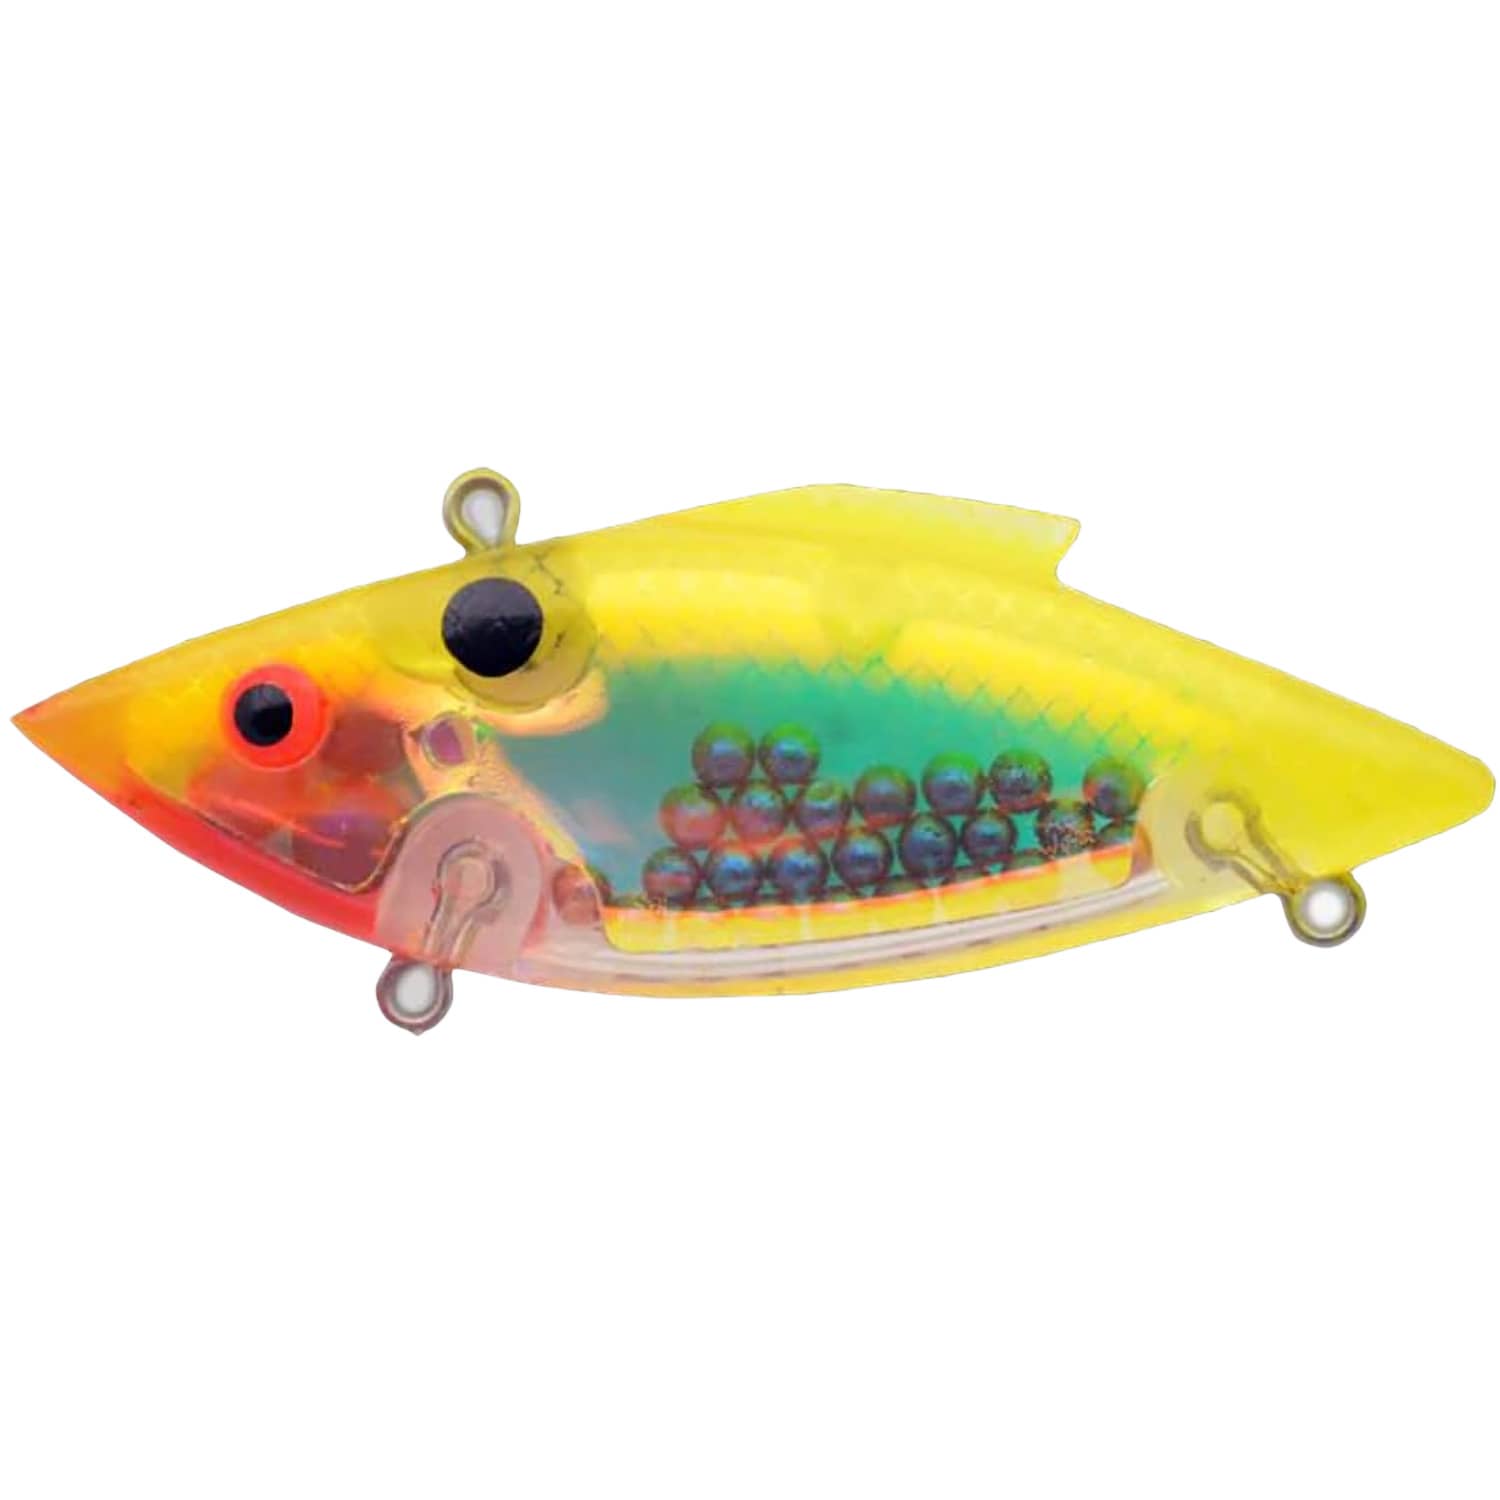 Bill Lewis Lures MG571S Mag-Trap Chartreuse Trans-P, 3/4 Oz